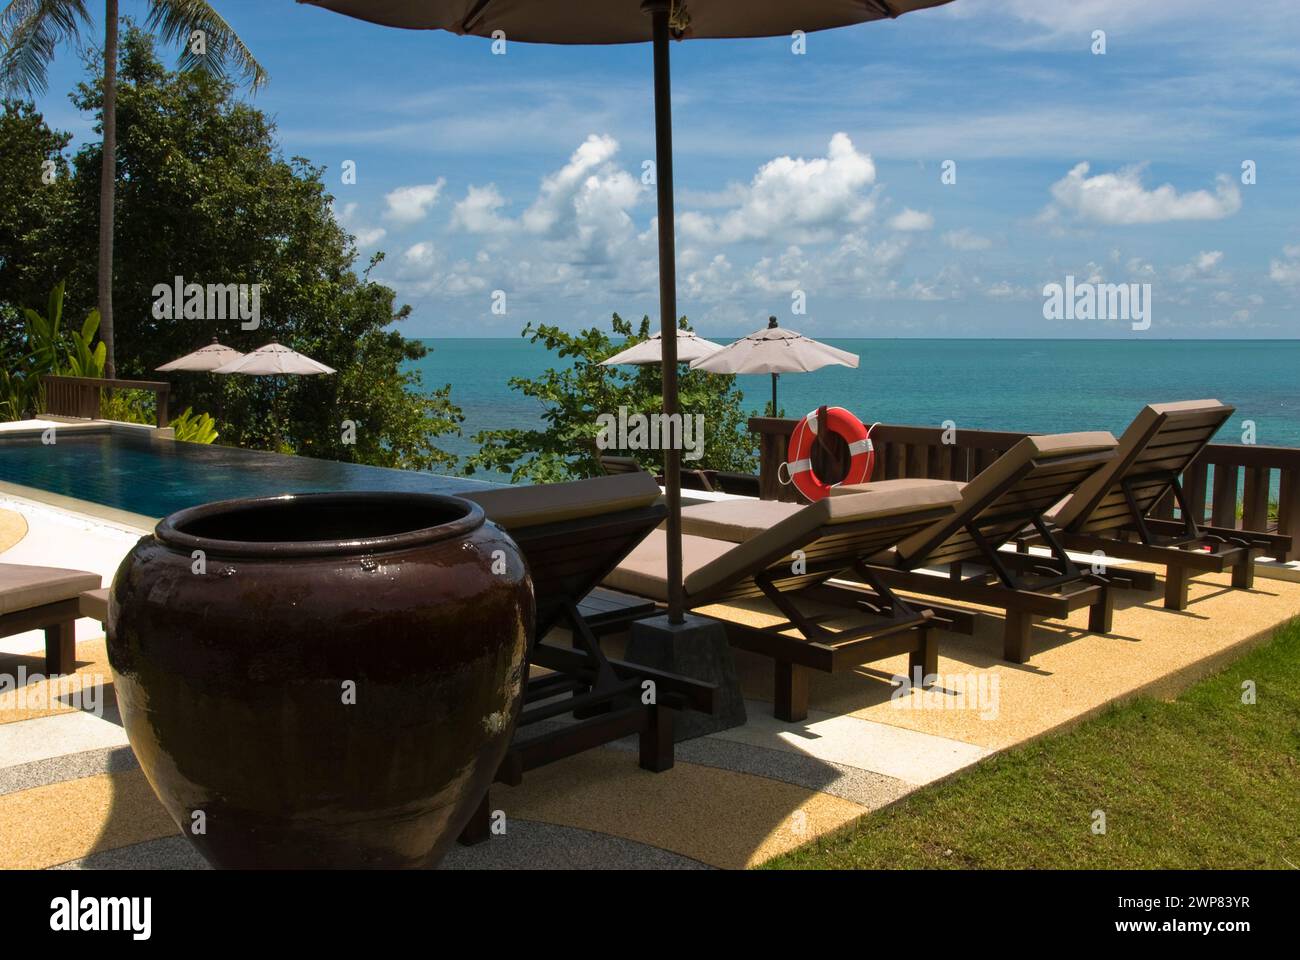 A luxury private pool at a hotel in Koh Samui, Thailand. Stock Photo